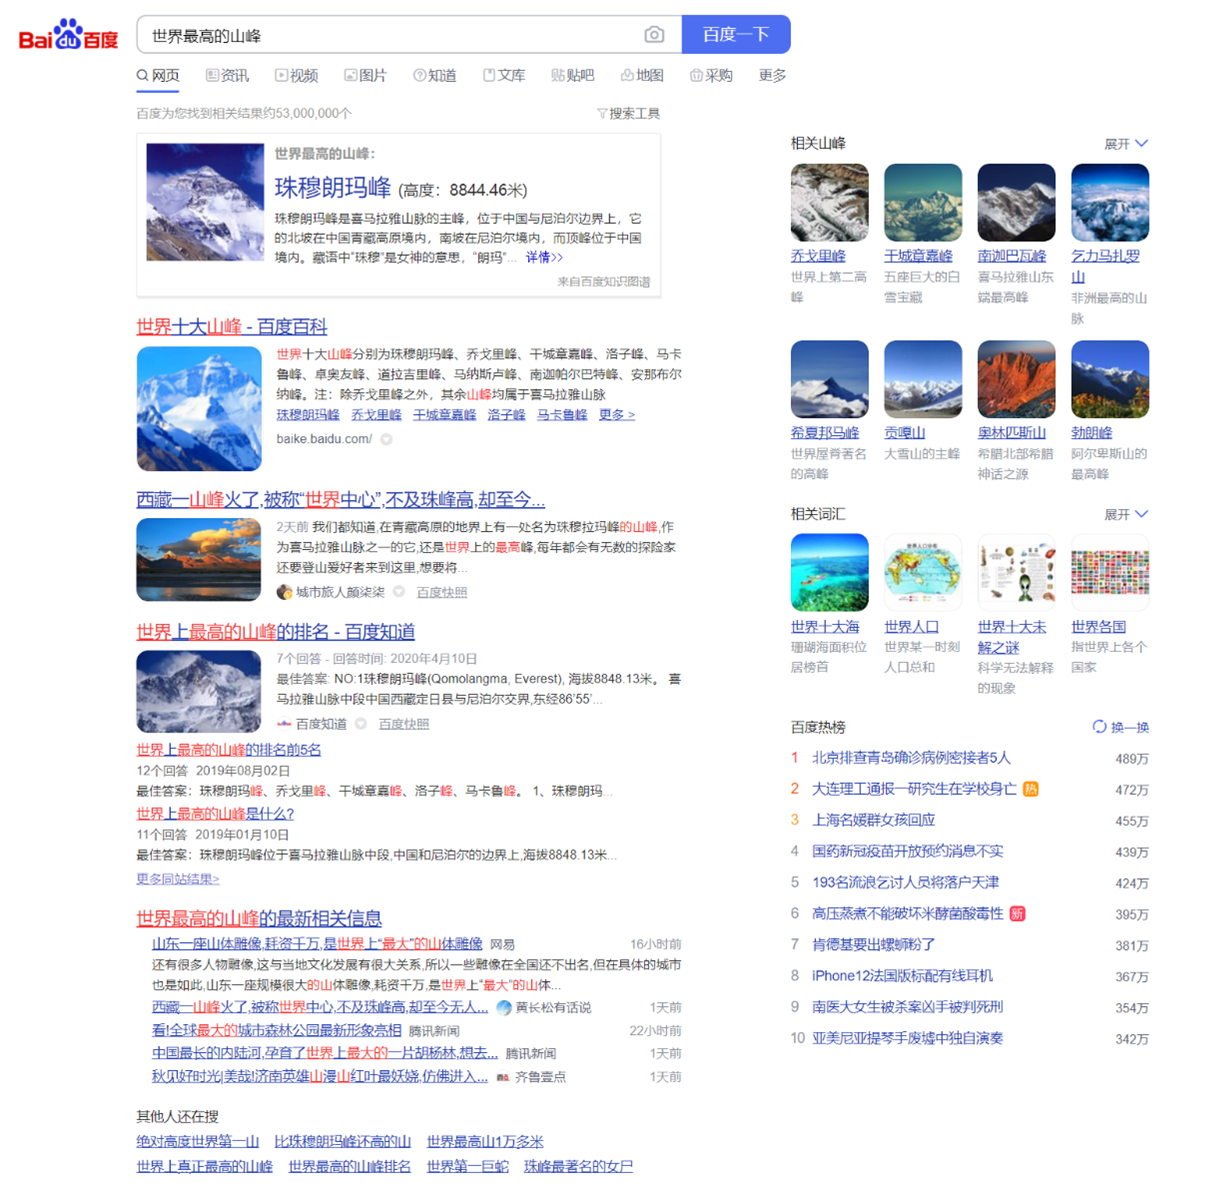 Baidu: Everything you need to know about China’s search engine